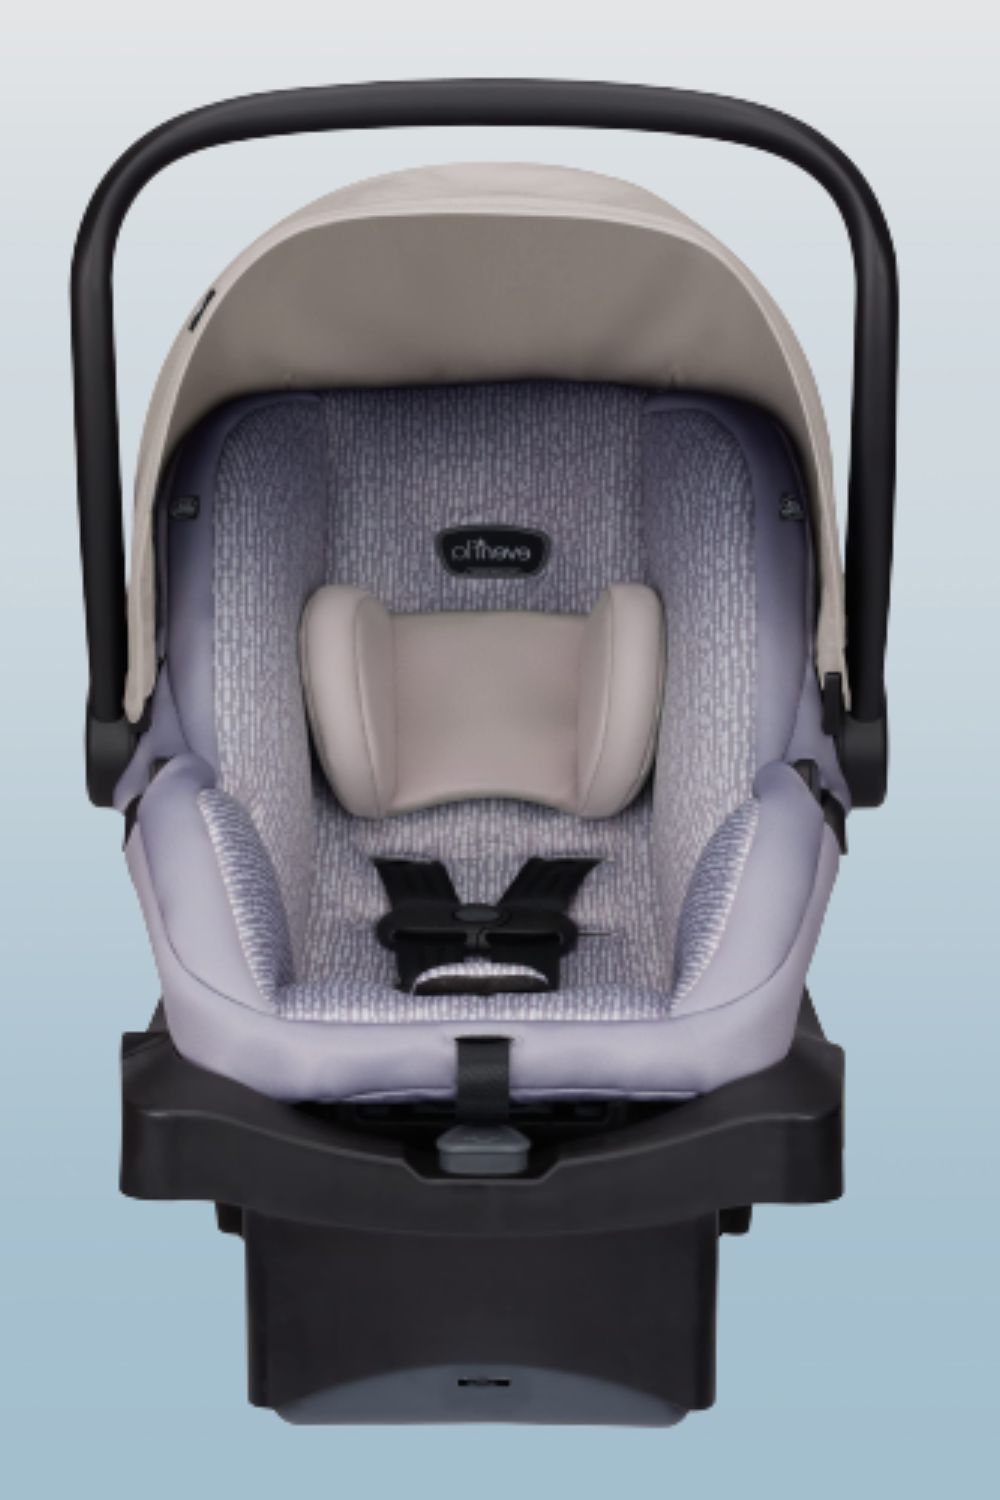 How to Remove Evenflo Car Seat from Stroller